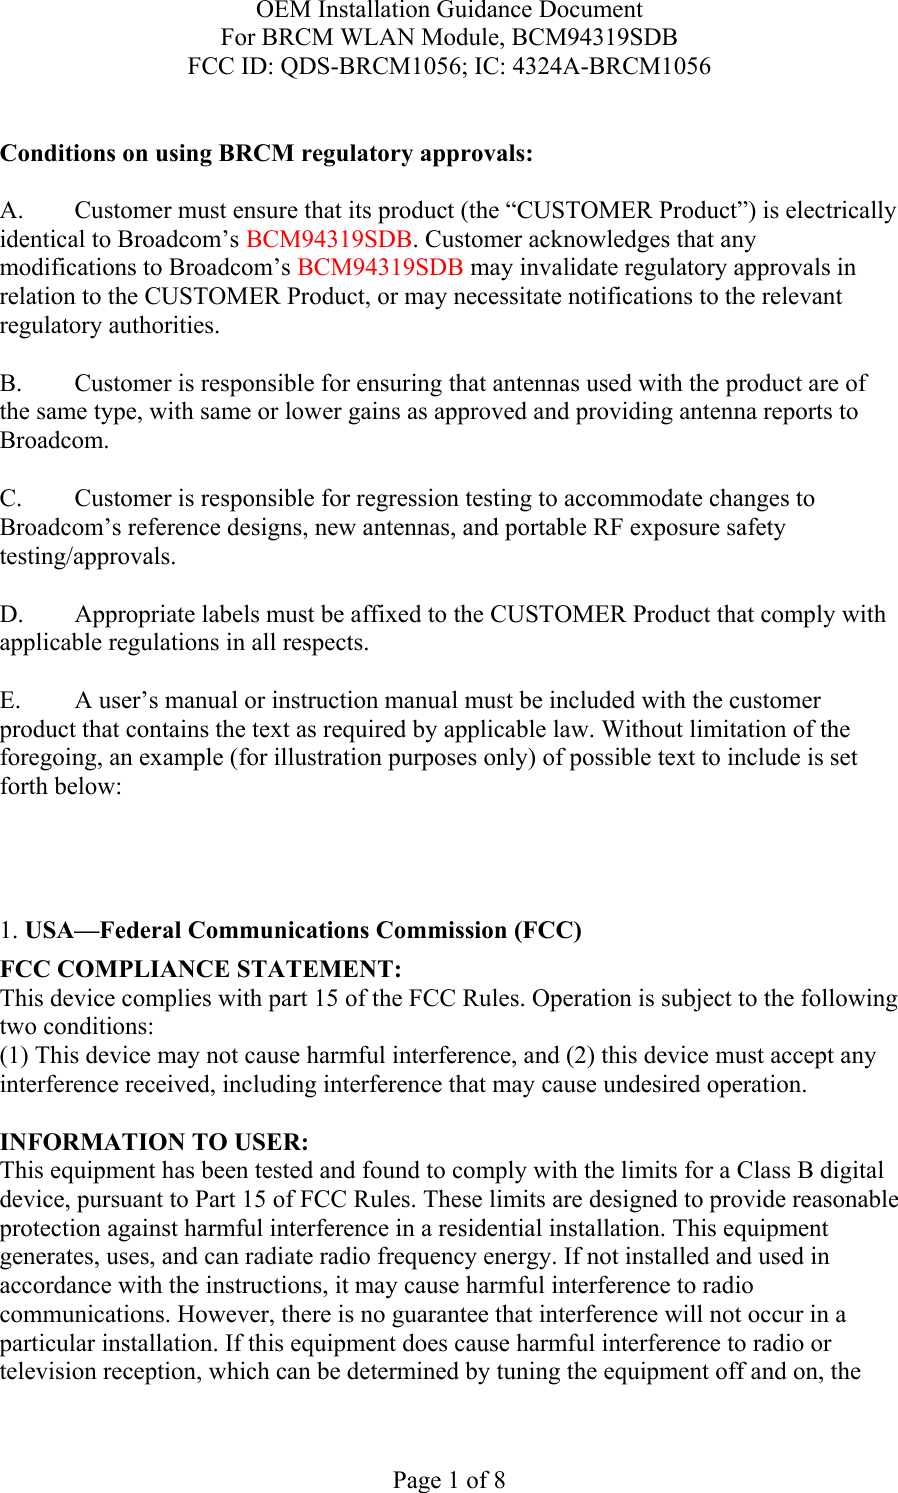 OEM Installation Guidance Document For BRCM WLAN Module, BCM94319SDB FCC ID: QDS-BRCM1056; IC: 4324A-BRCM1056  Page 1 of 8  Conditions on using BRCM regulatory approvals:   A.  Customer must ensure that its product (the “CUSTOMER Product”) is electrically identical to Broadcom’s BCM94319SDB. Customer acknowledges that any modifications to Broadcom’s BCM94319SDB may invalidate regulatory approvals in relation to the CUSTOMER Product, or may necessitate notifications to the relevant regulatory authorities.  B.   Customer is responsible for ensuring that antennas used with the product are of the same type, with same or lower gains as approved and providing antenna reports to Broadcom.  C.   Customer is responsible for regression testing to accommodate changes to Broadcom’s reference designs, new antennas, and portable RF exposure safety testing/approvals.  D.  Appropriate labels must be affixed to the CUSTOMER Product that comply with applicable regulations in all respects.    E.  A user’s manual or instruction manual must be included with the customer product that contains the text as required by applicable law. Without limitation of the foregoing, an example (for illustration purposes only) of possible text to include is set forth below:      1. USA—Federal Communications Commission (FCC) FCC COMPLIANCE STATEMENT: This device complies with part 15 of the FCC Rules. Operation is subject to the following two conditions: (1) This device may not cause harmful interference, and (2) this device must accept any interference received, including interference that may cause undesired operation.  INFORMATION TO USER: This equipment has been tested and found to comply with the limits for a Class B digital device, pursuant to Part 15 of FCC Rules. These limits are designed to provide reasonable protection against harmful interference in a residential installation. This equipment generates, uses, and can radiate radio frequency energy. If not installed and used in accordance with the instructions, it may cause harmful interference to radio communications. However, there is no guarantee that interference will not occur in a particular installation. If this equipment does cause harmful interference to radio or television reception, which can be determined by tuning the equipment off and on, the 